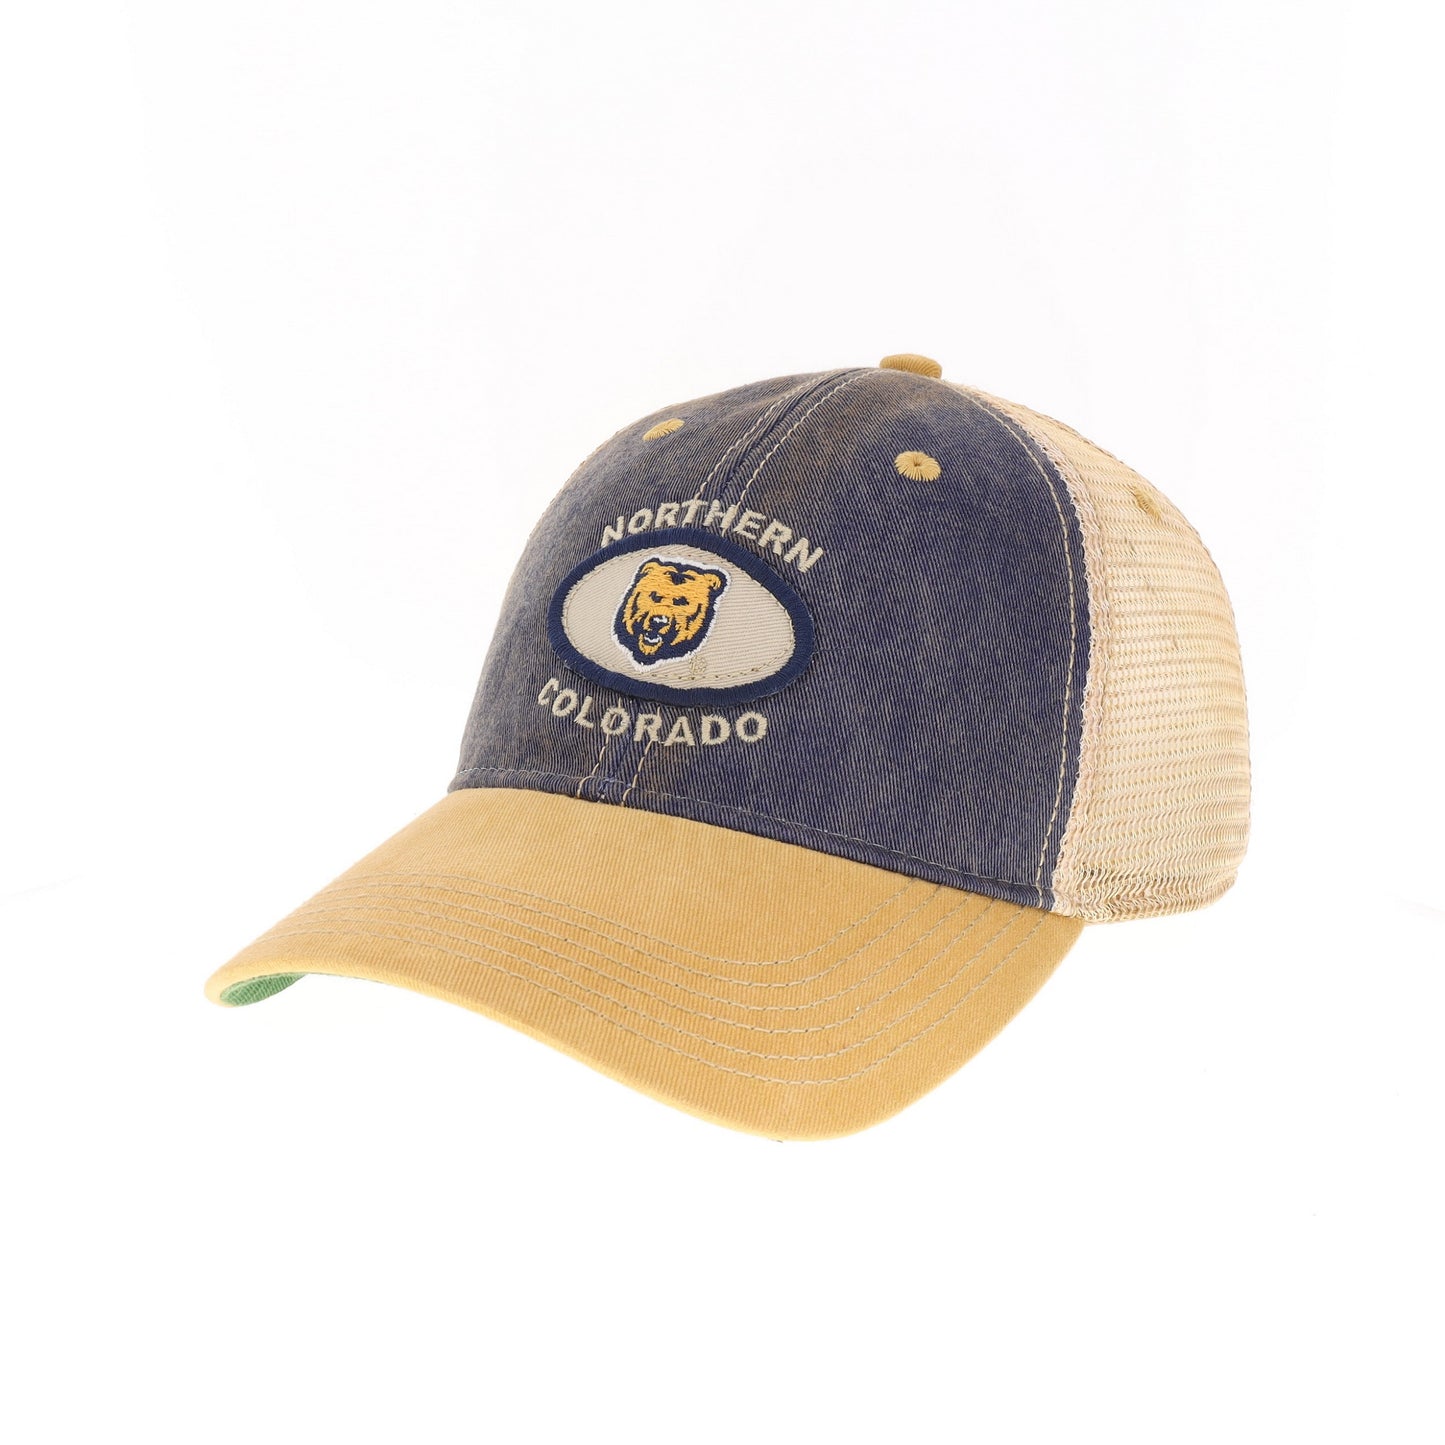 NORTHERN COLORADO BEARS OVAL PATCH 2-TONE TRUCKER HAT - NAVY/YELLOW